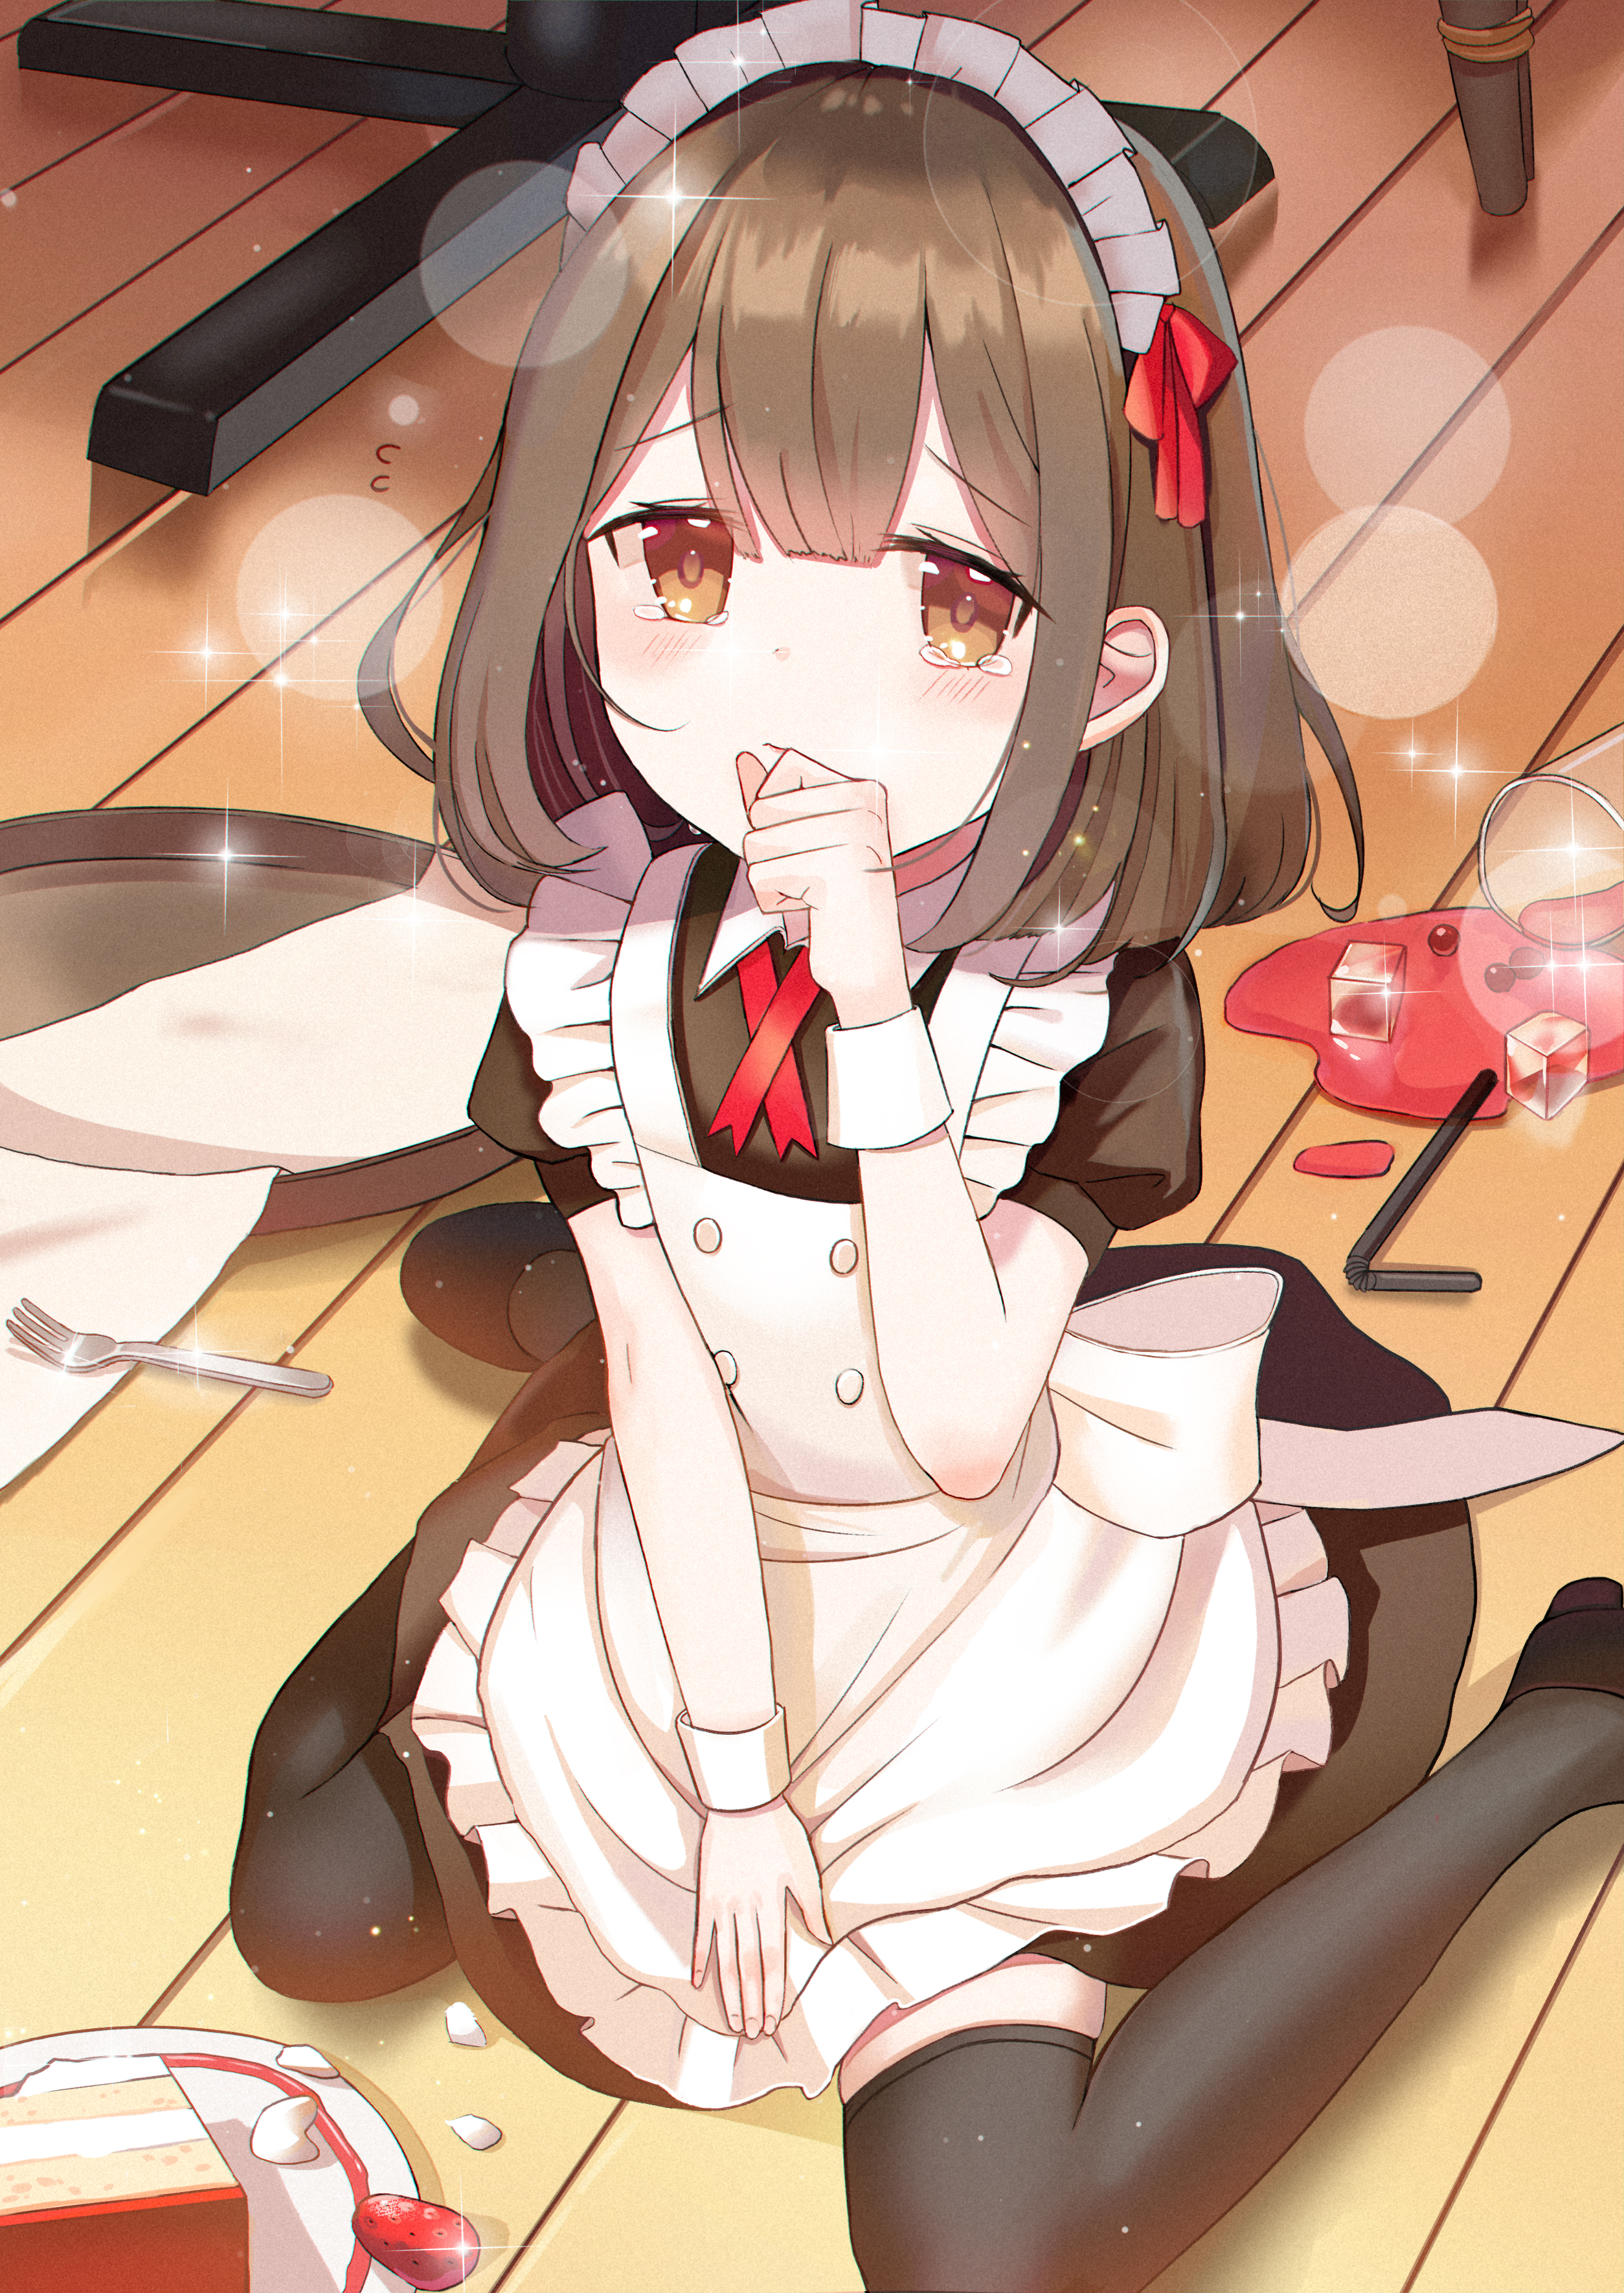 Anime Anime Girls Maid Outfit Vertical Maid Fork Strawberries 2508x3541